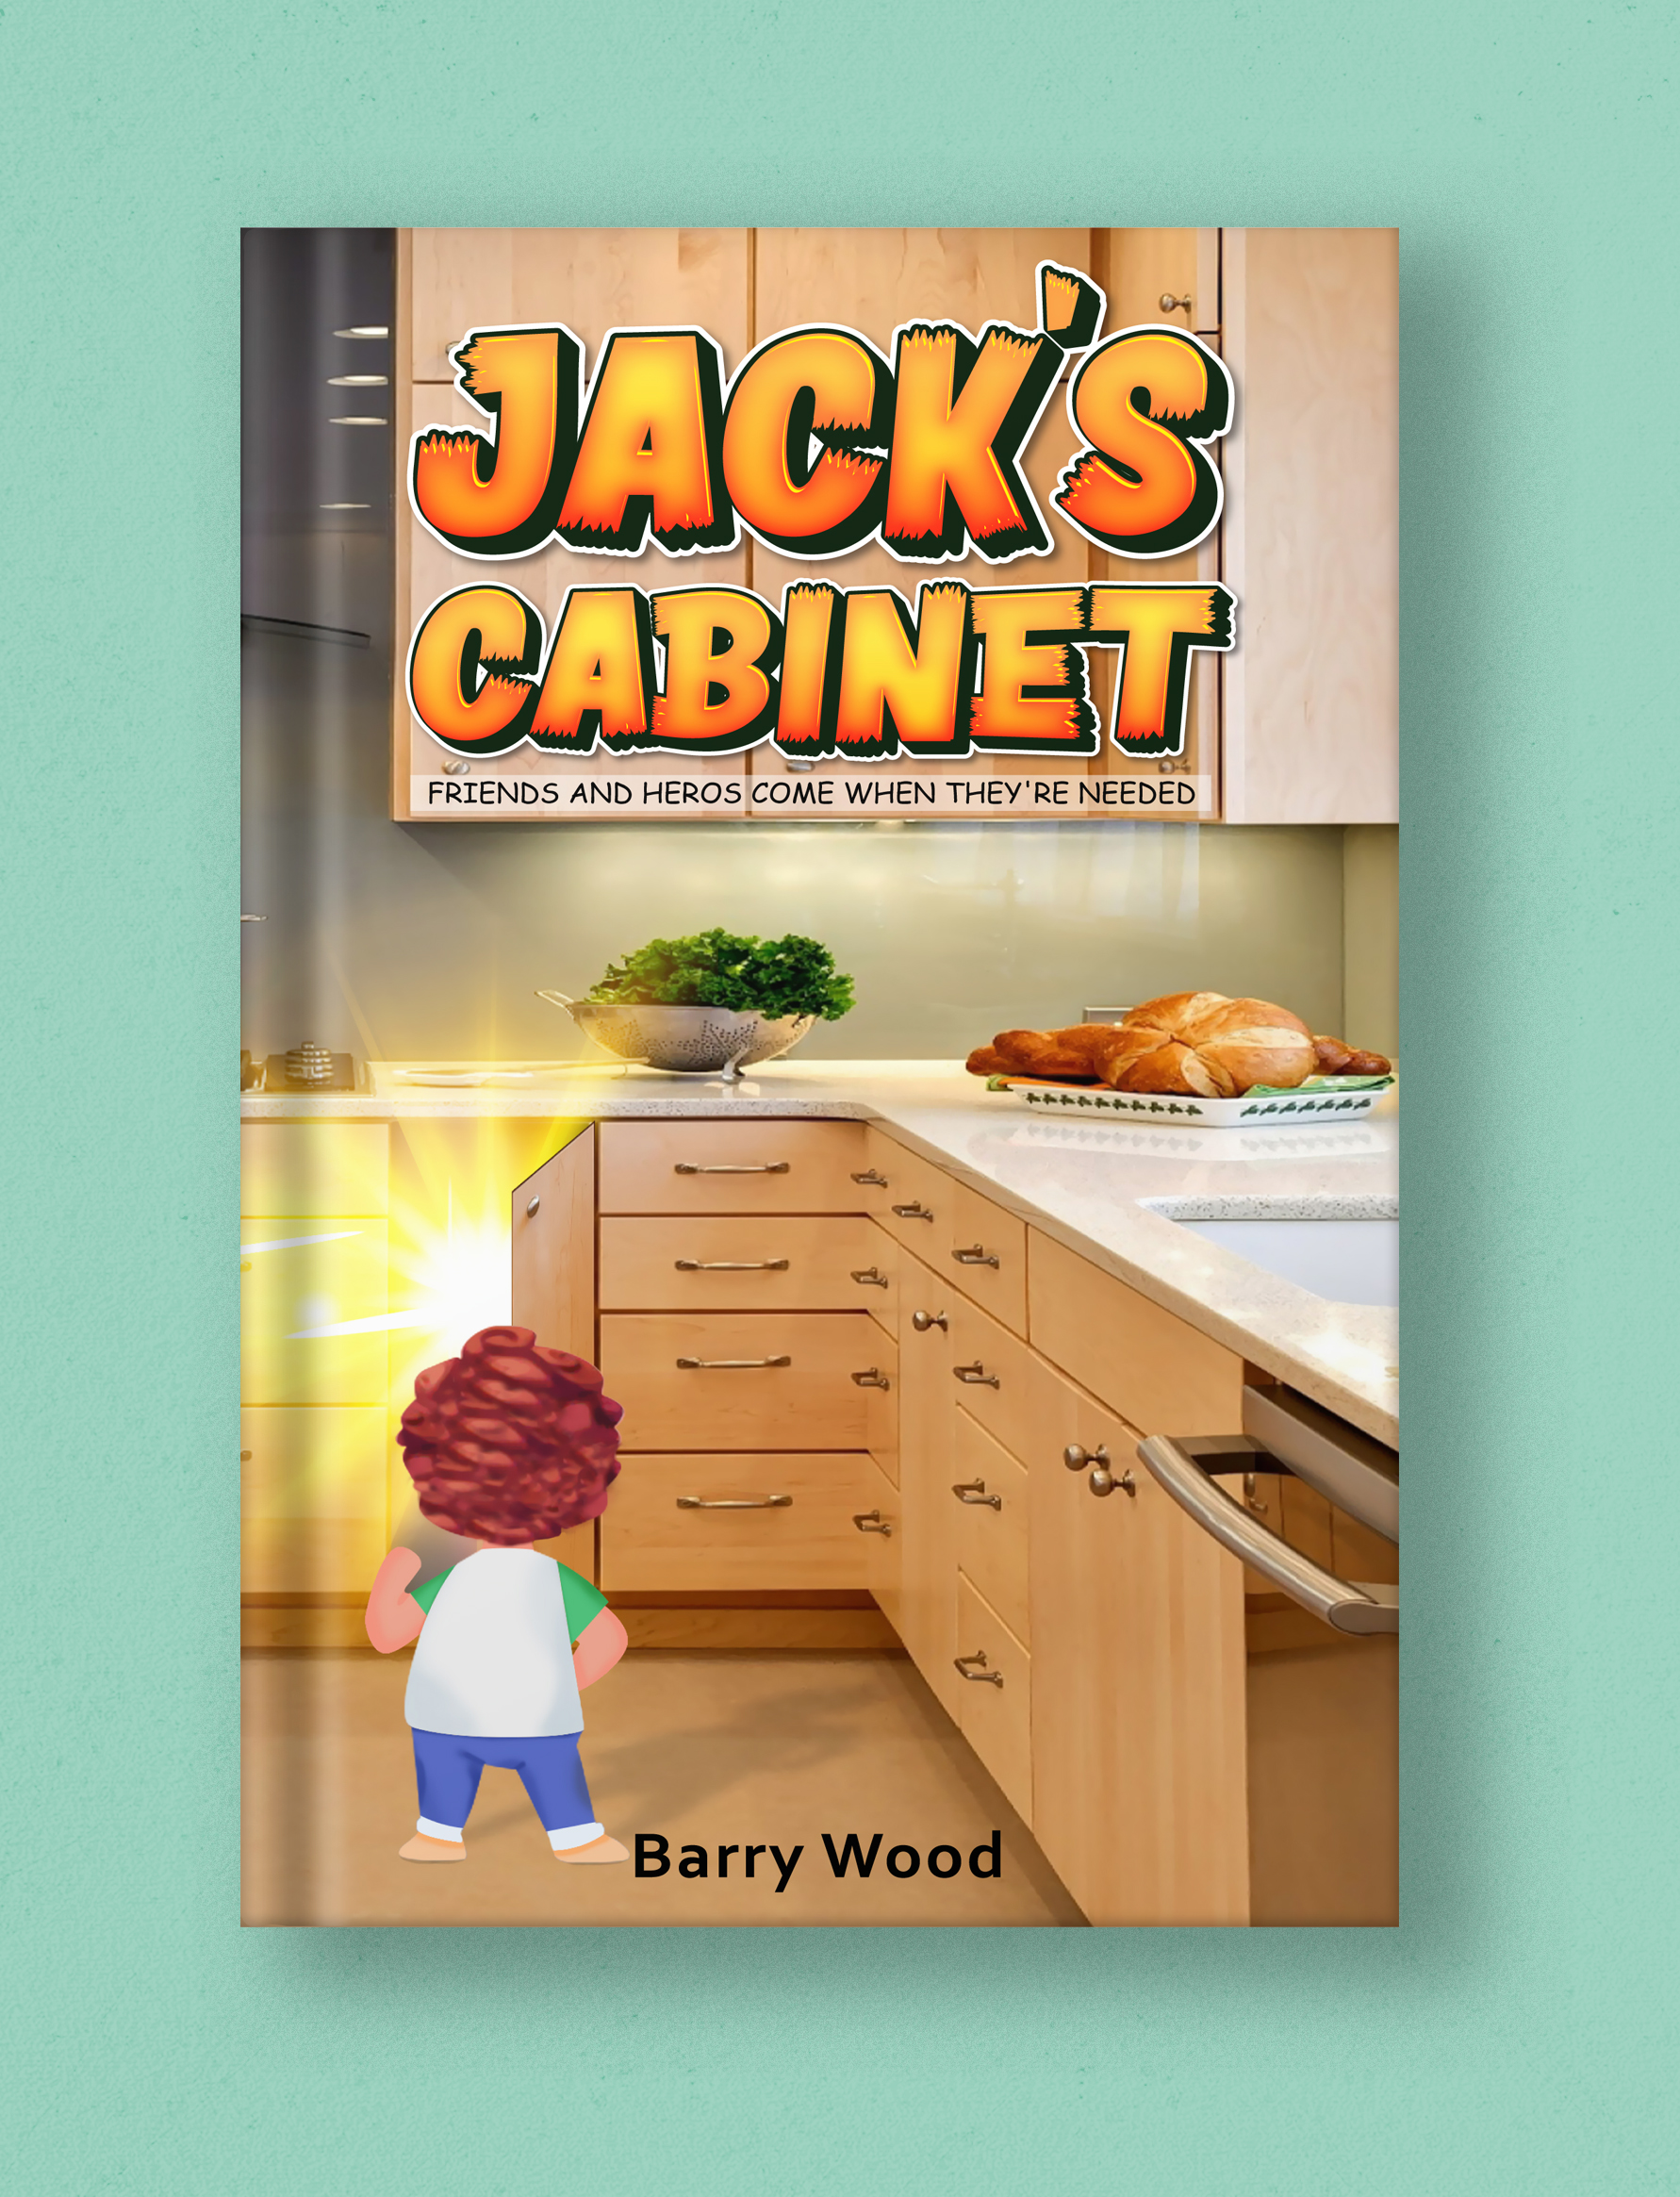 Jack’s Cabinet - Immerse in A World Full of Wonder